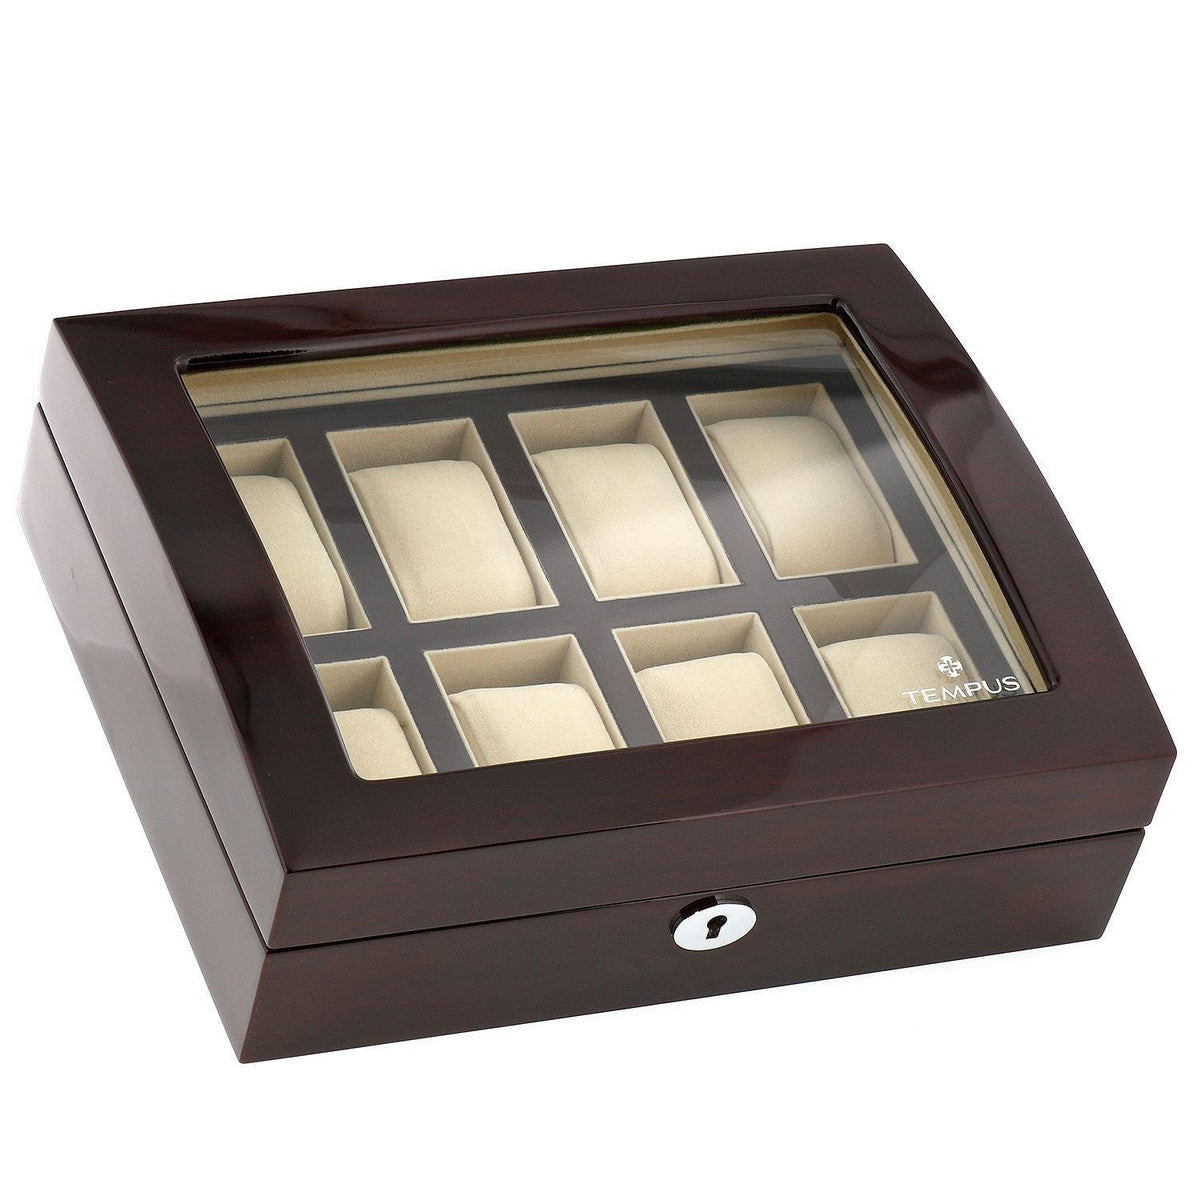 High Quality Watch Collectors Box for 8 Watches with Mahogany Veneer High Gloss Finish by Tempus